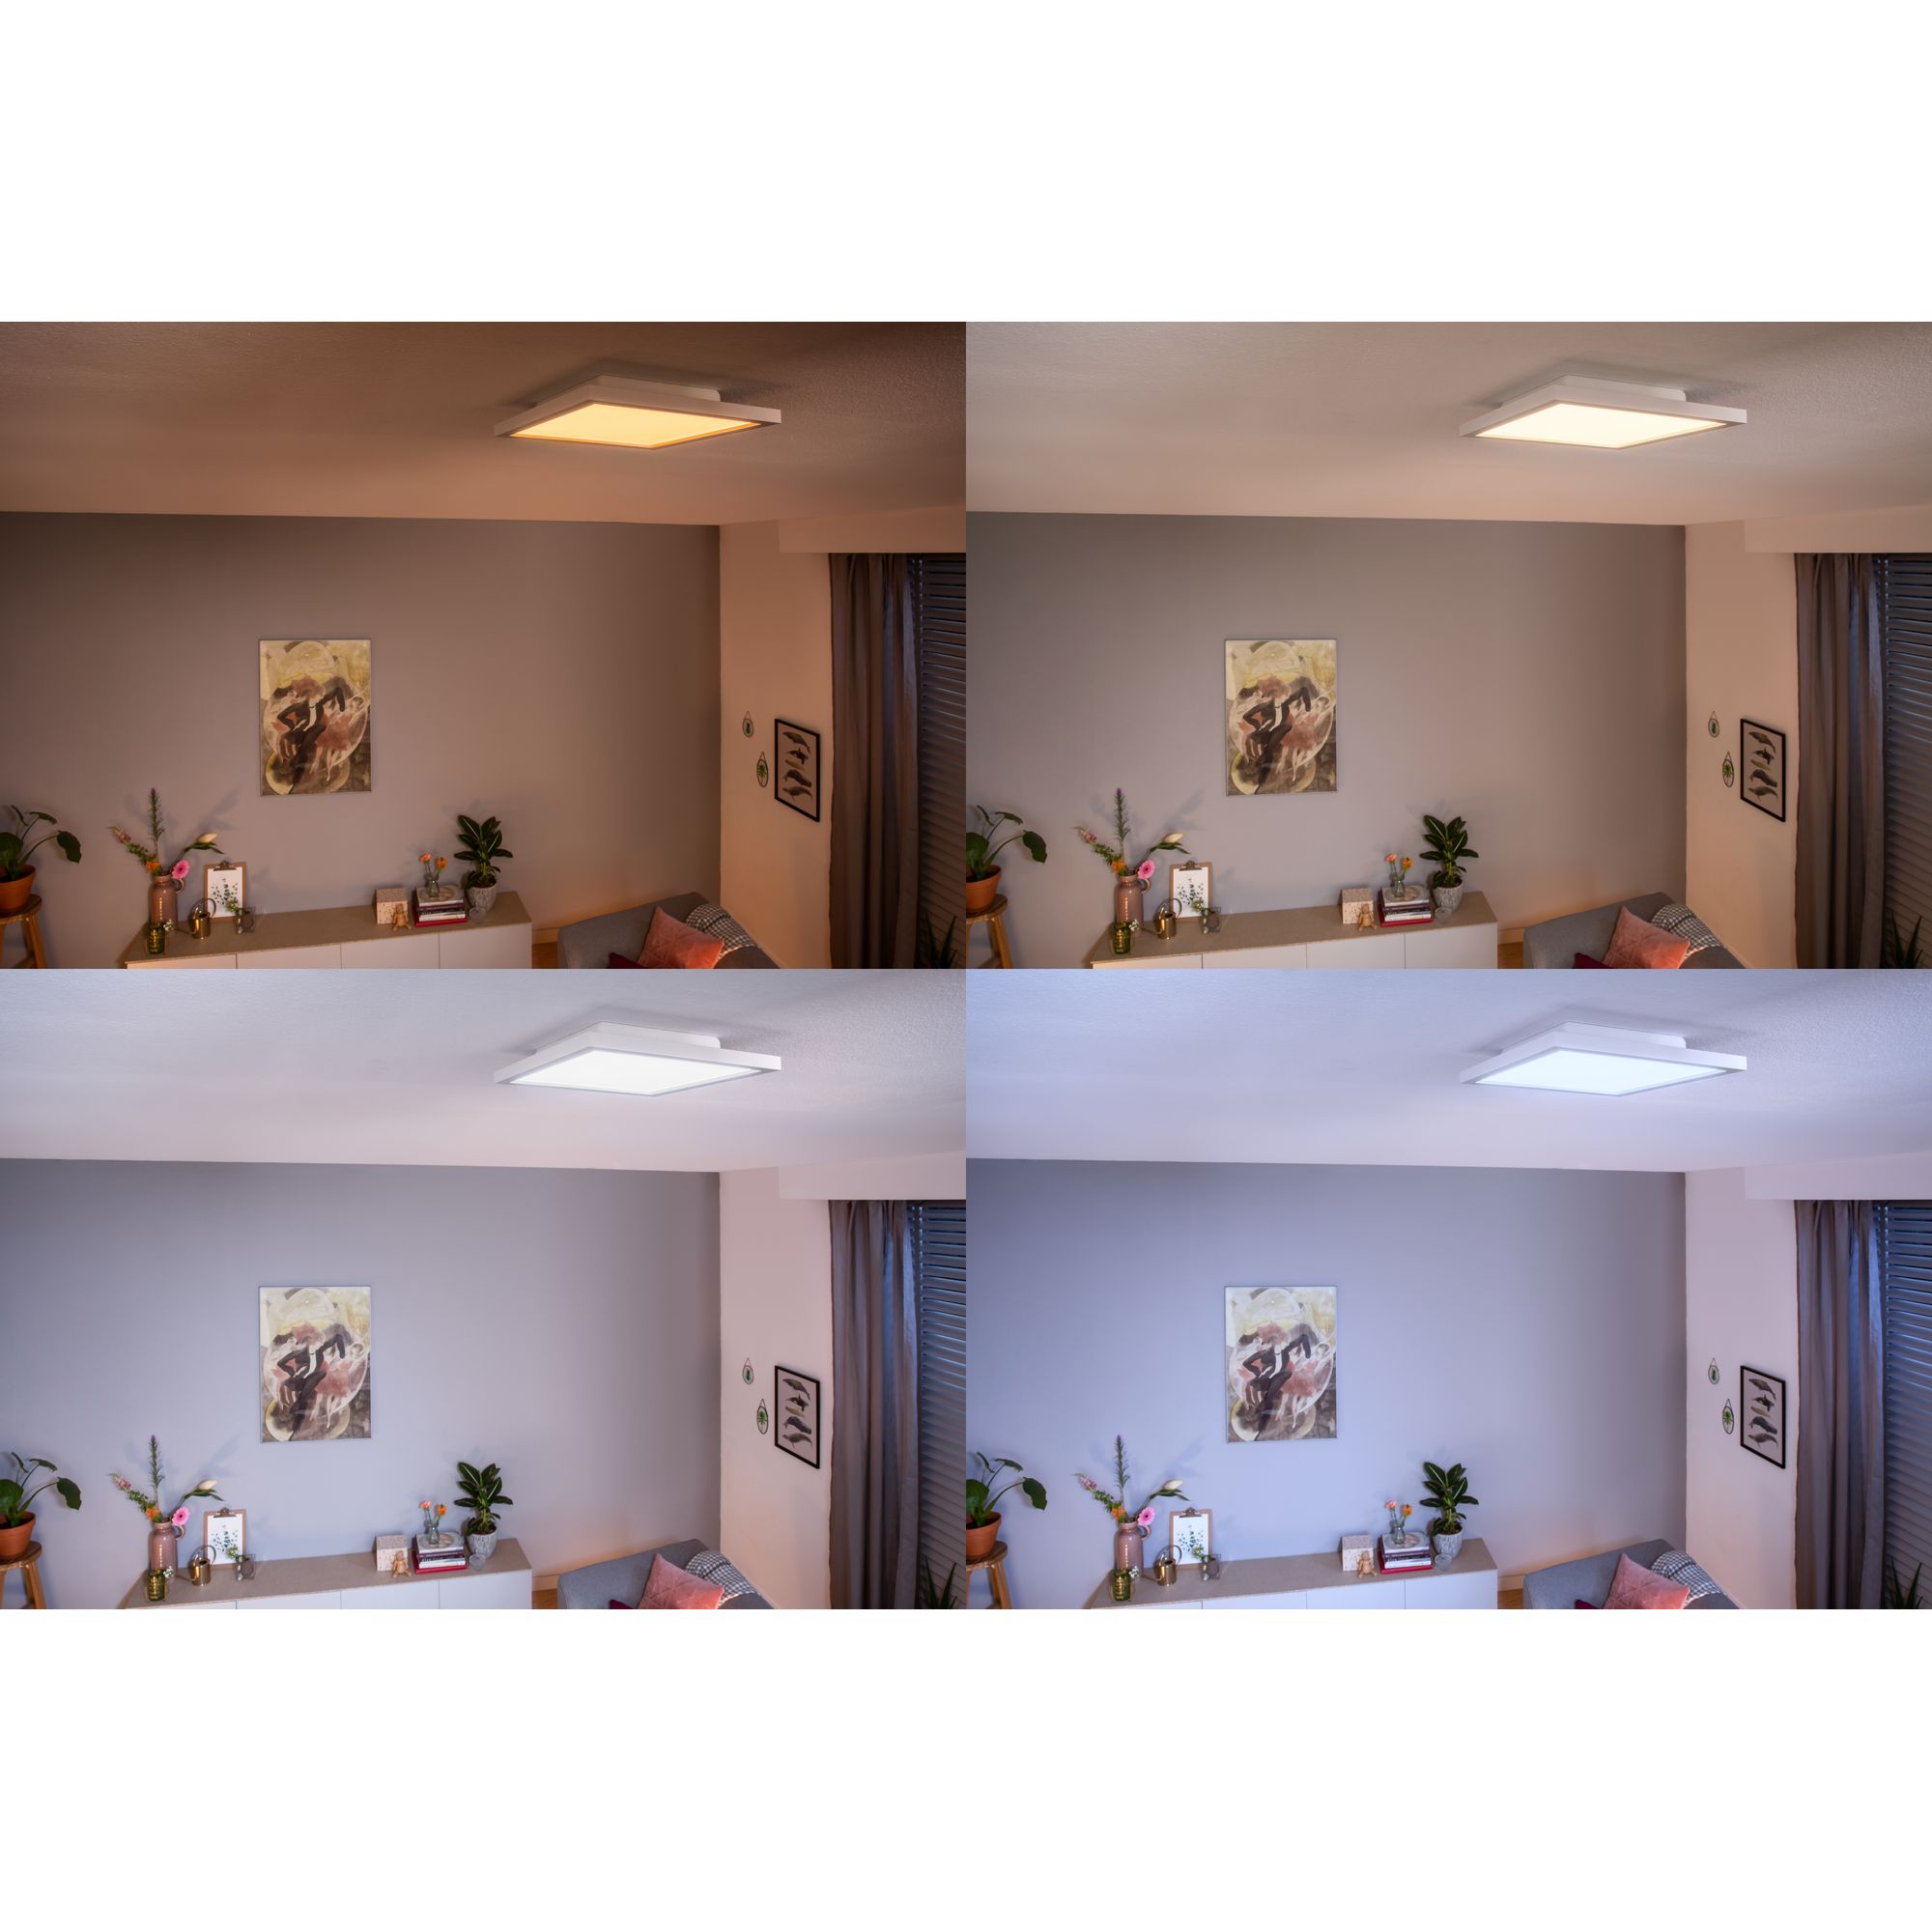 LED-Panelleuchte "Hue" Aurelle vierecking White Ambiance weiß 2200 lm + product picture